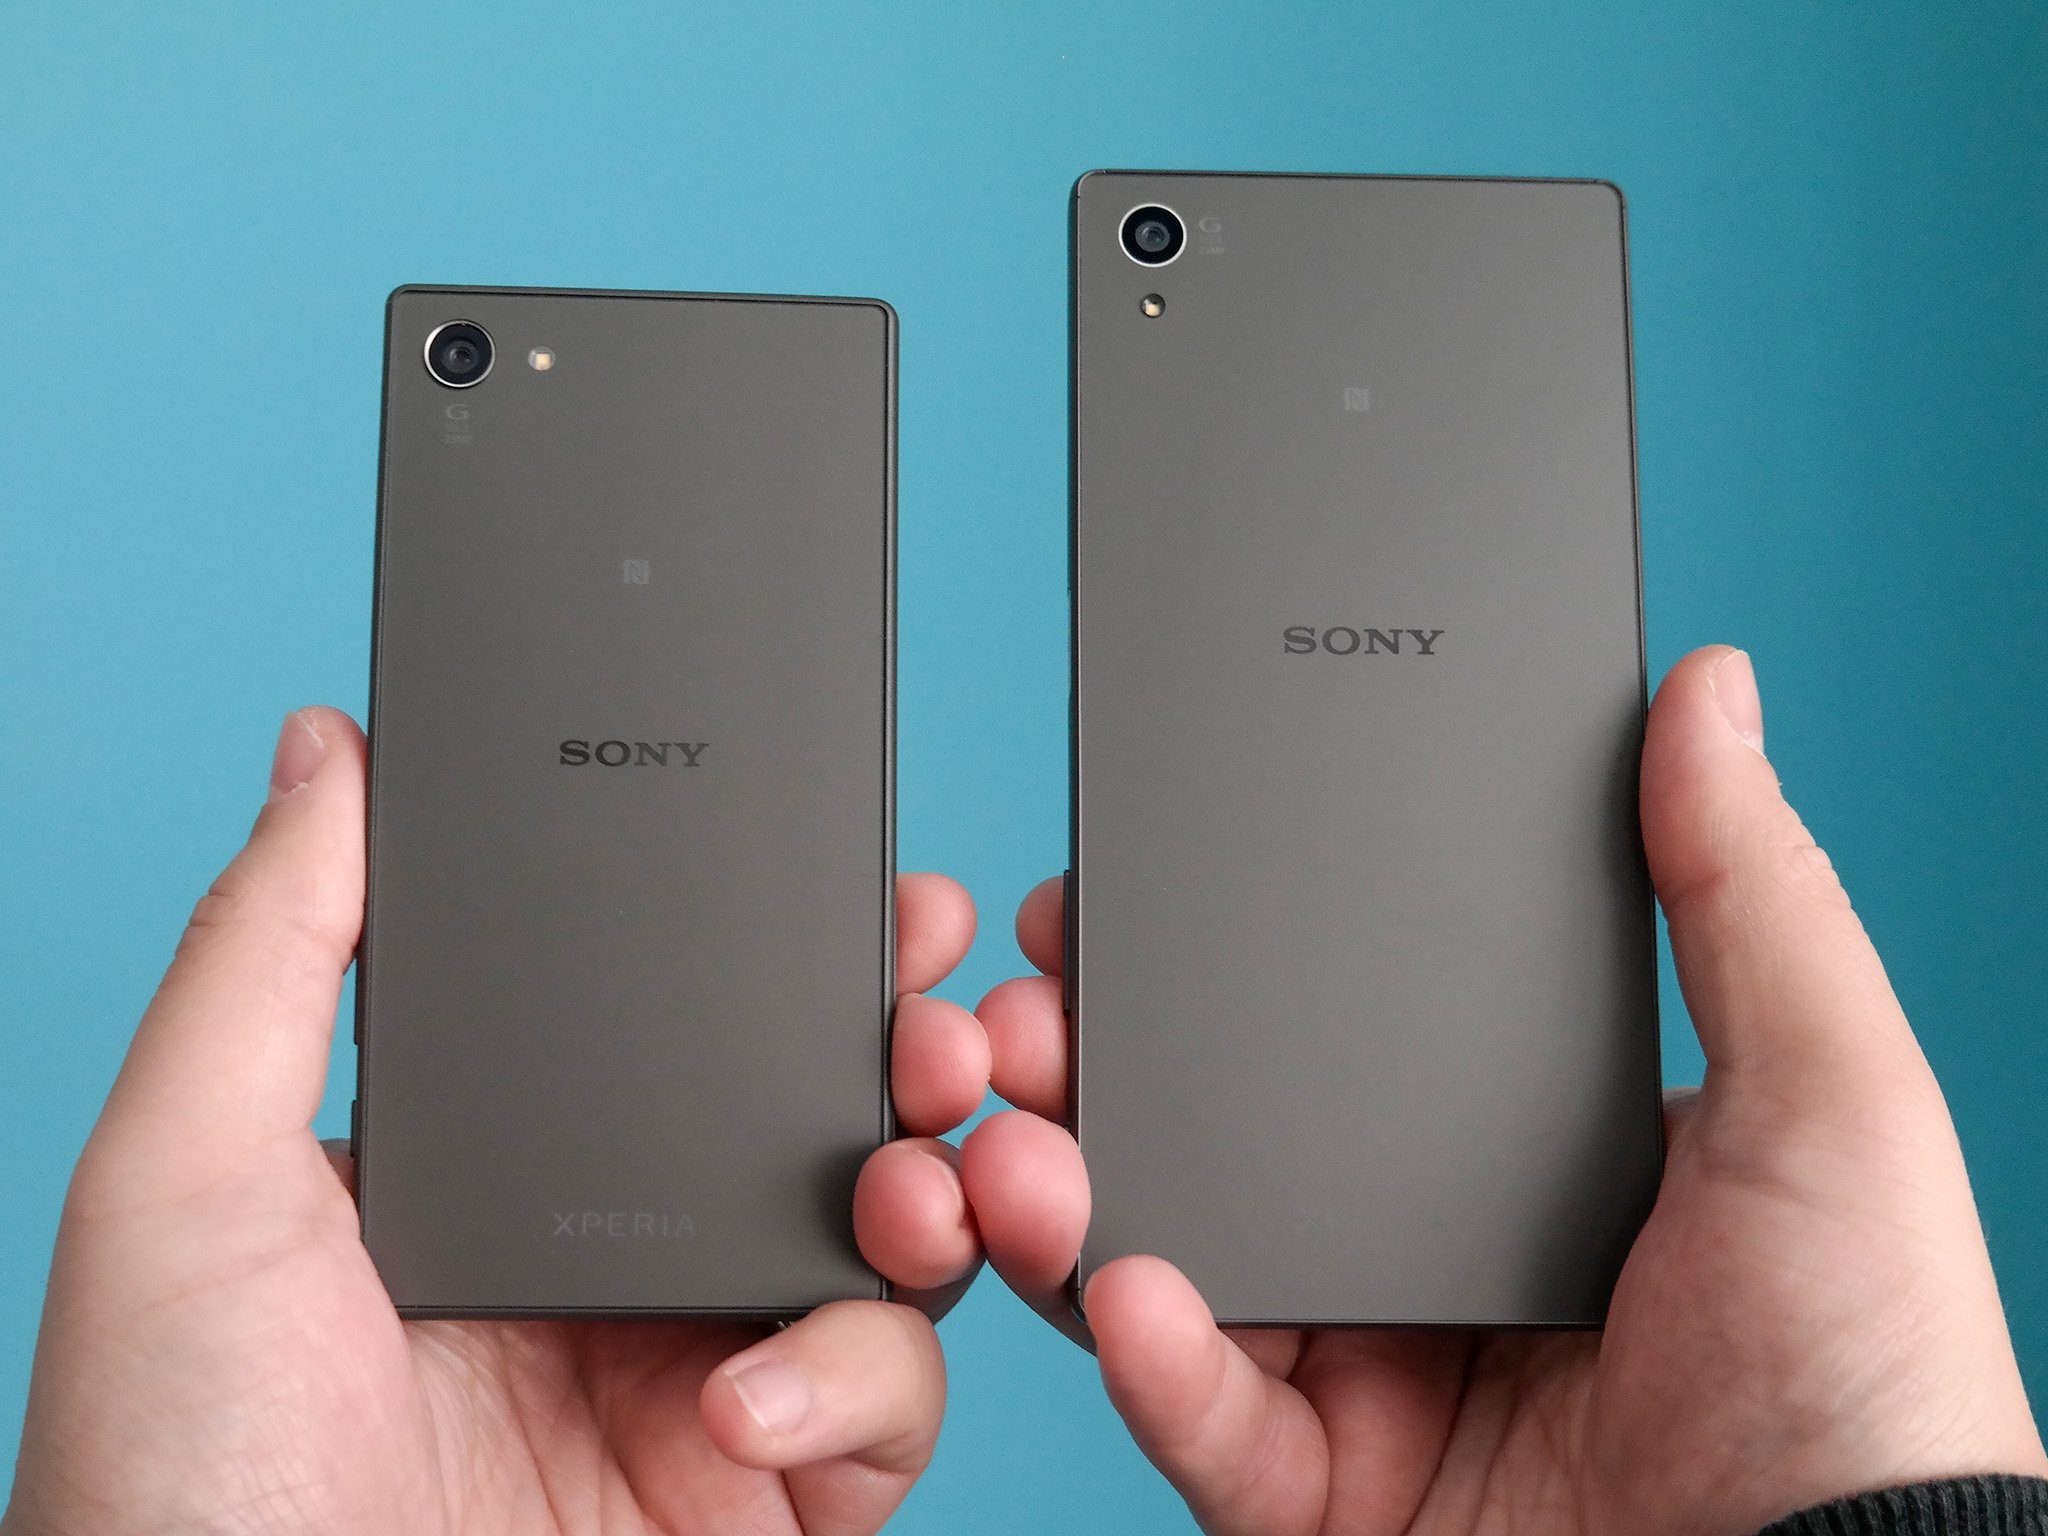 Absoluut Religieus Ladder What's the difference between the Sony Xperia Z5 and Xperia Z5 Compact? |  Android Central